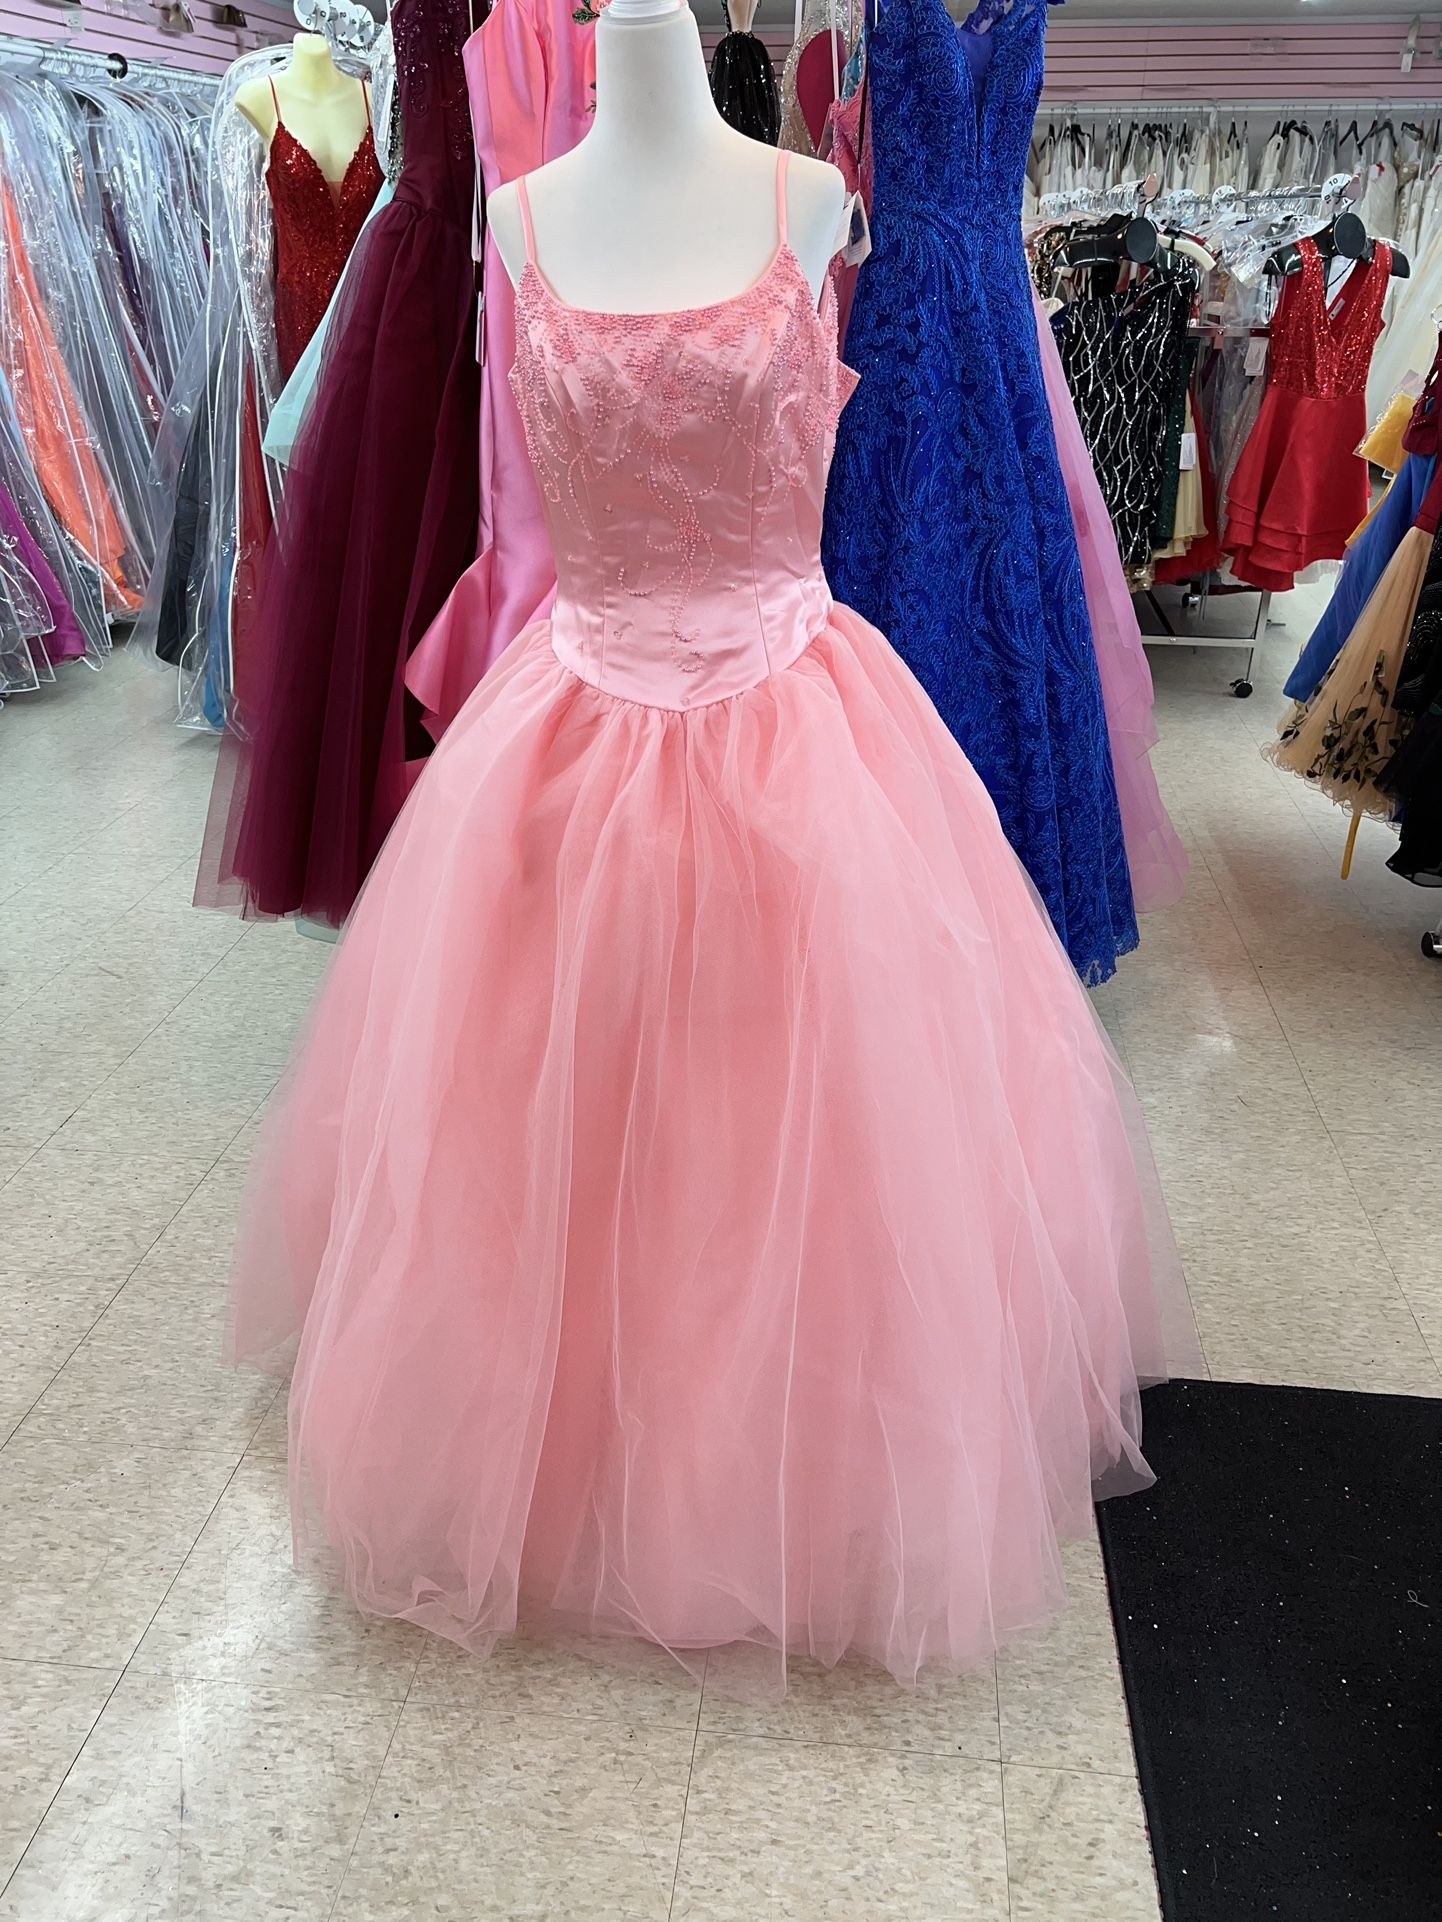 New With Tags Size 8 Quinceanera Gown $250